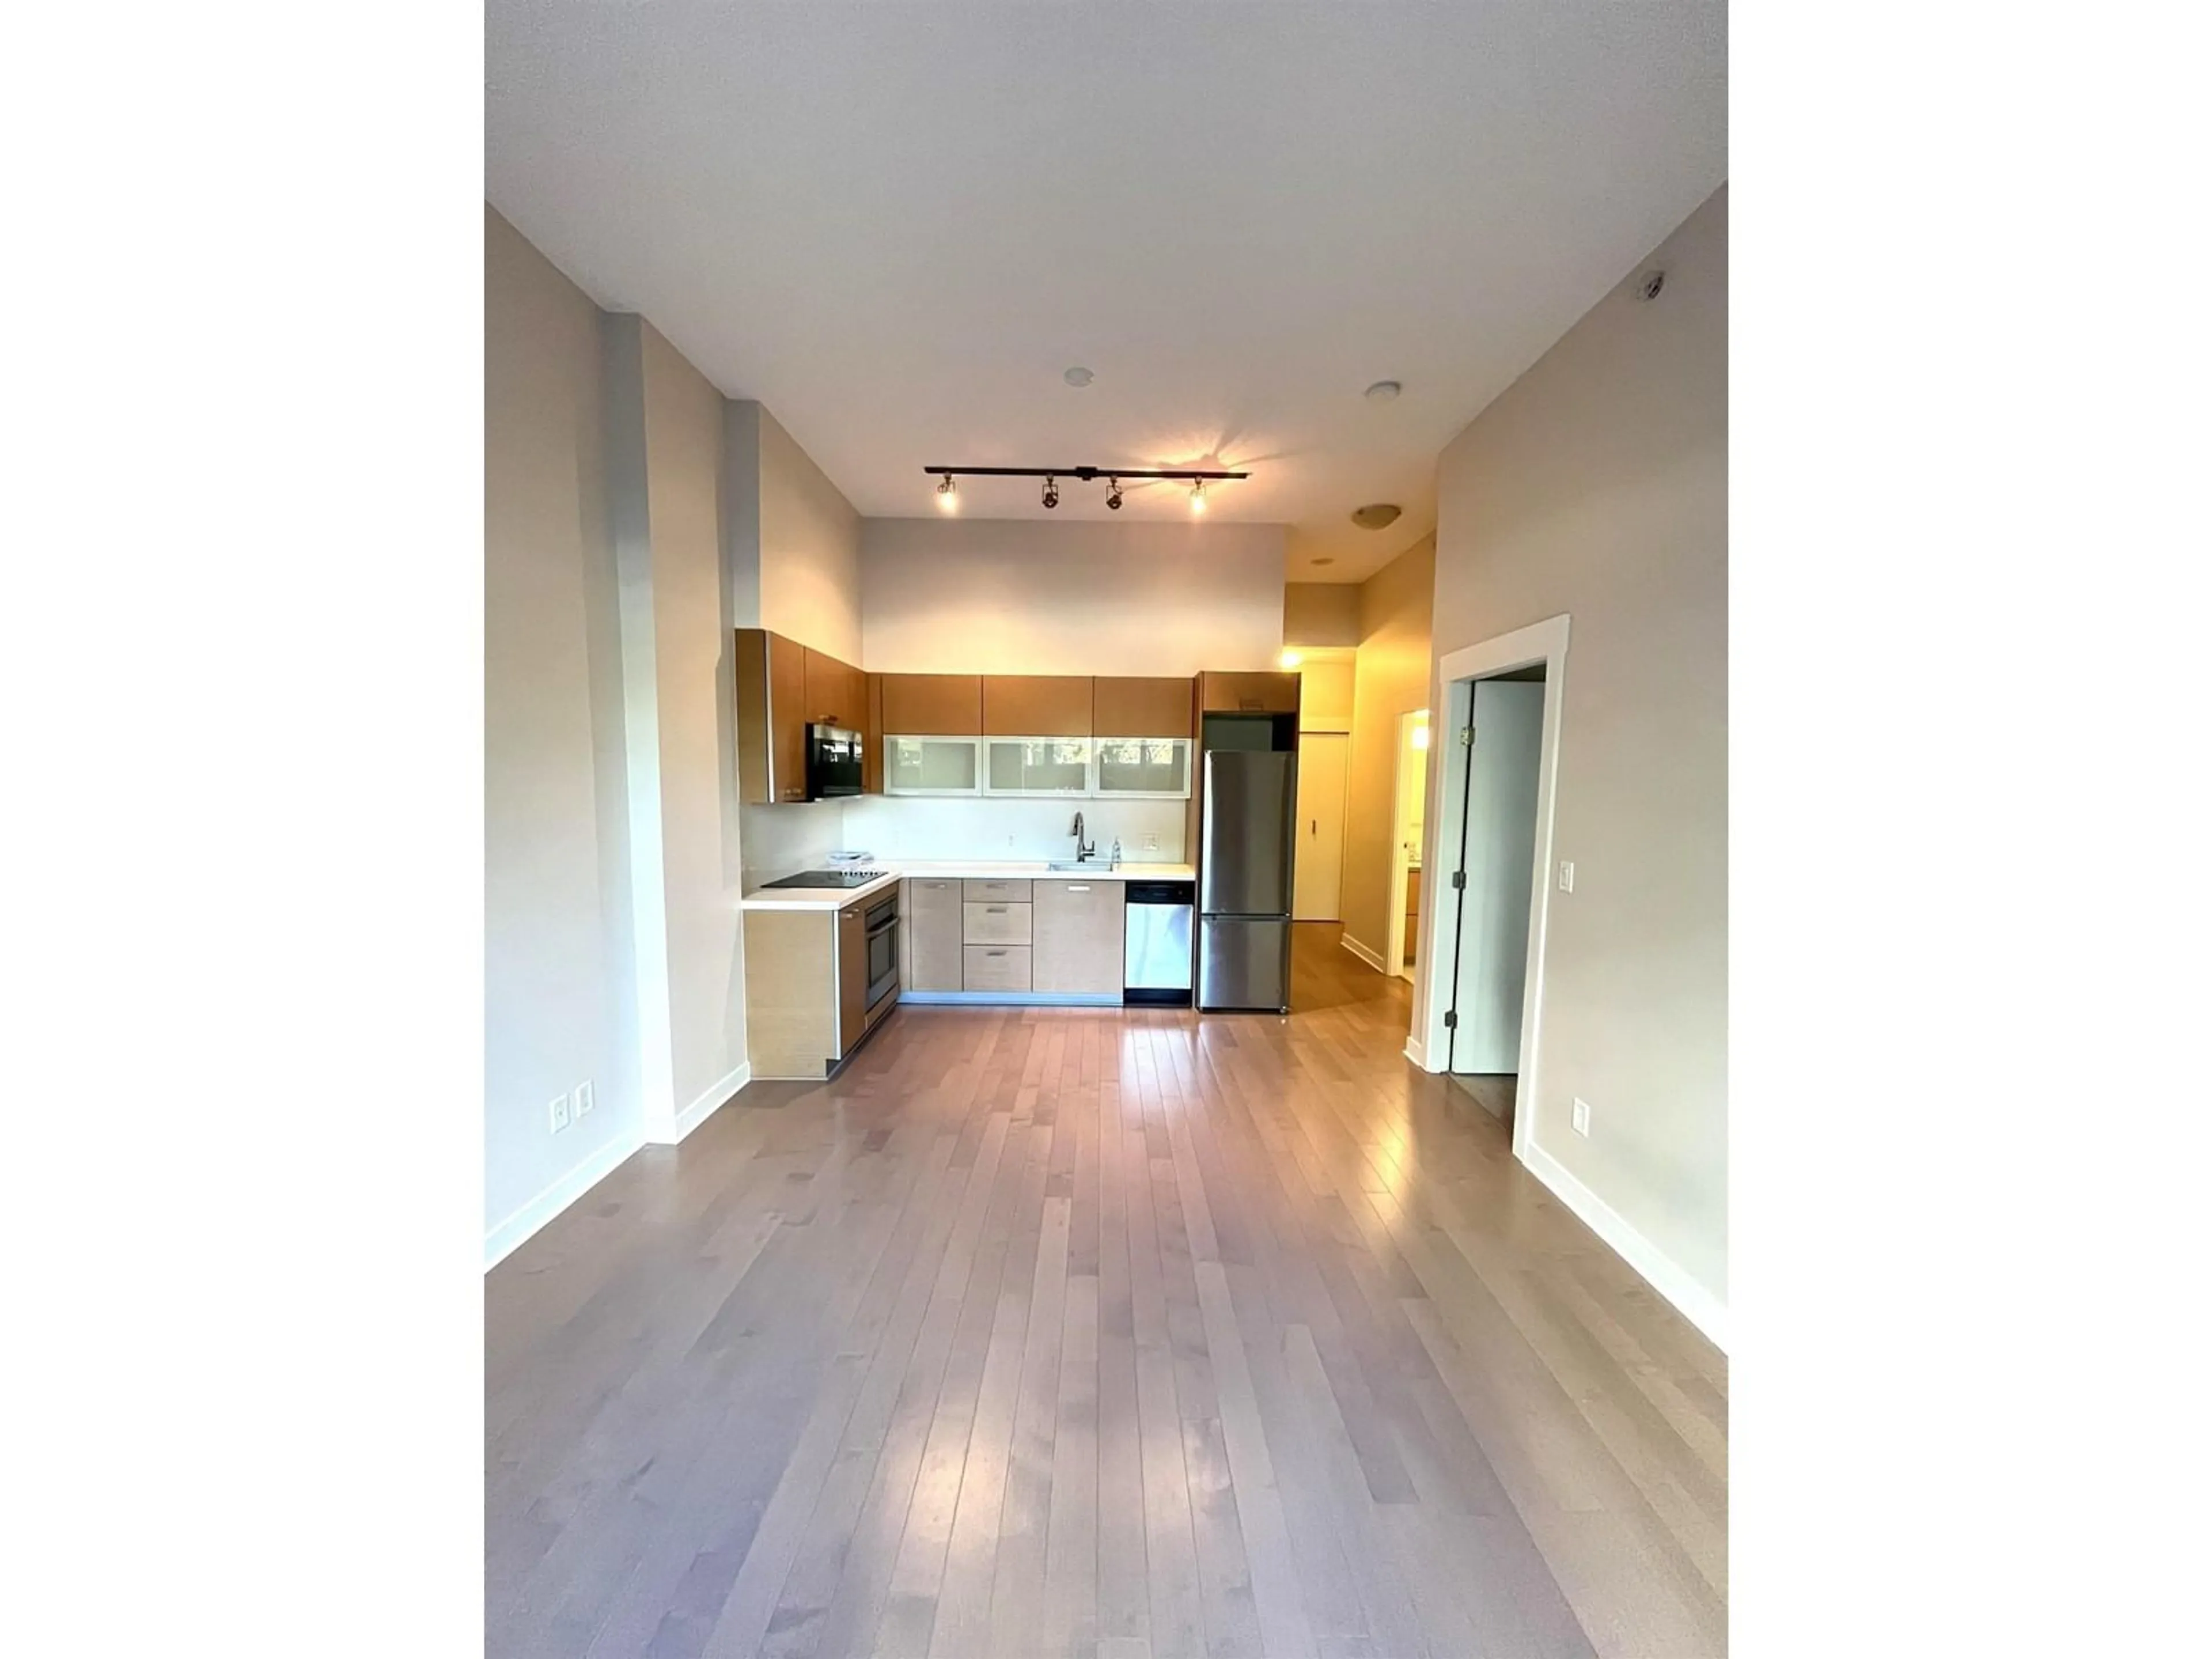 Other indoor space for 102 13380 108 AVENUE, Surrey British Columbia V3T0E7